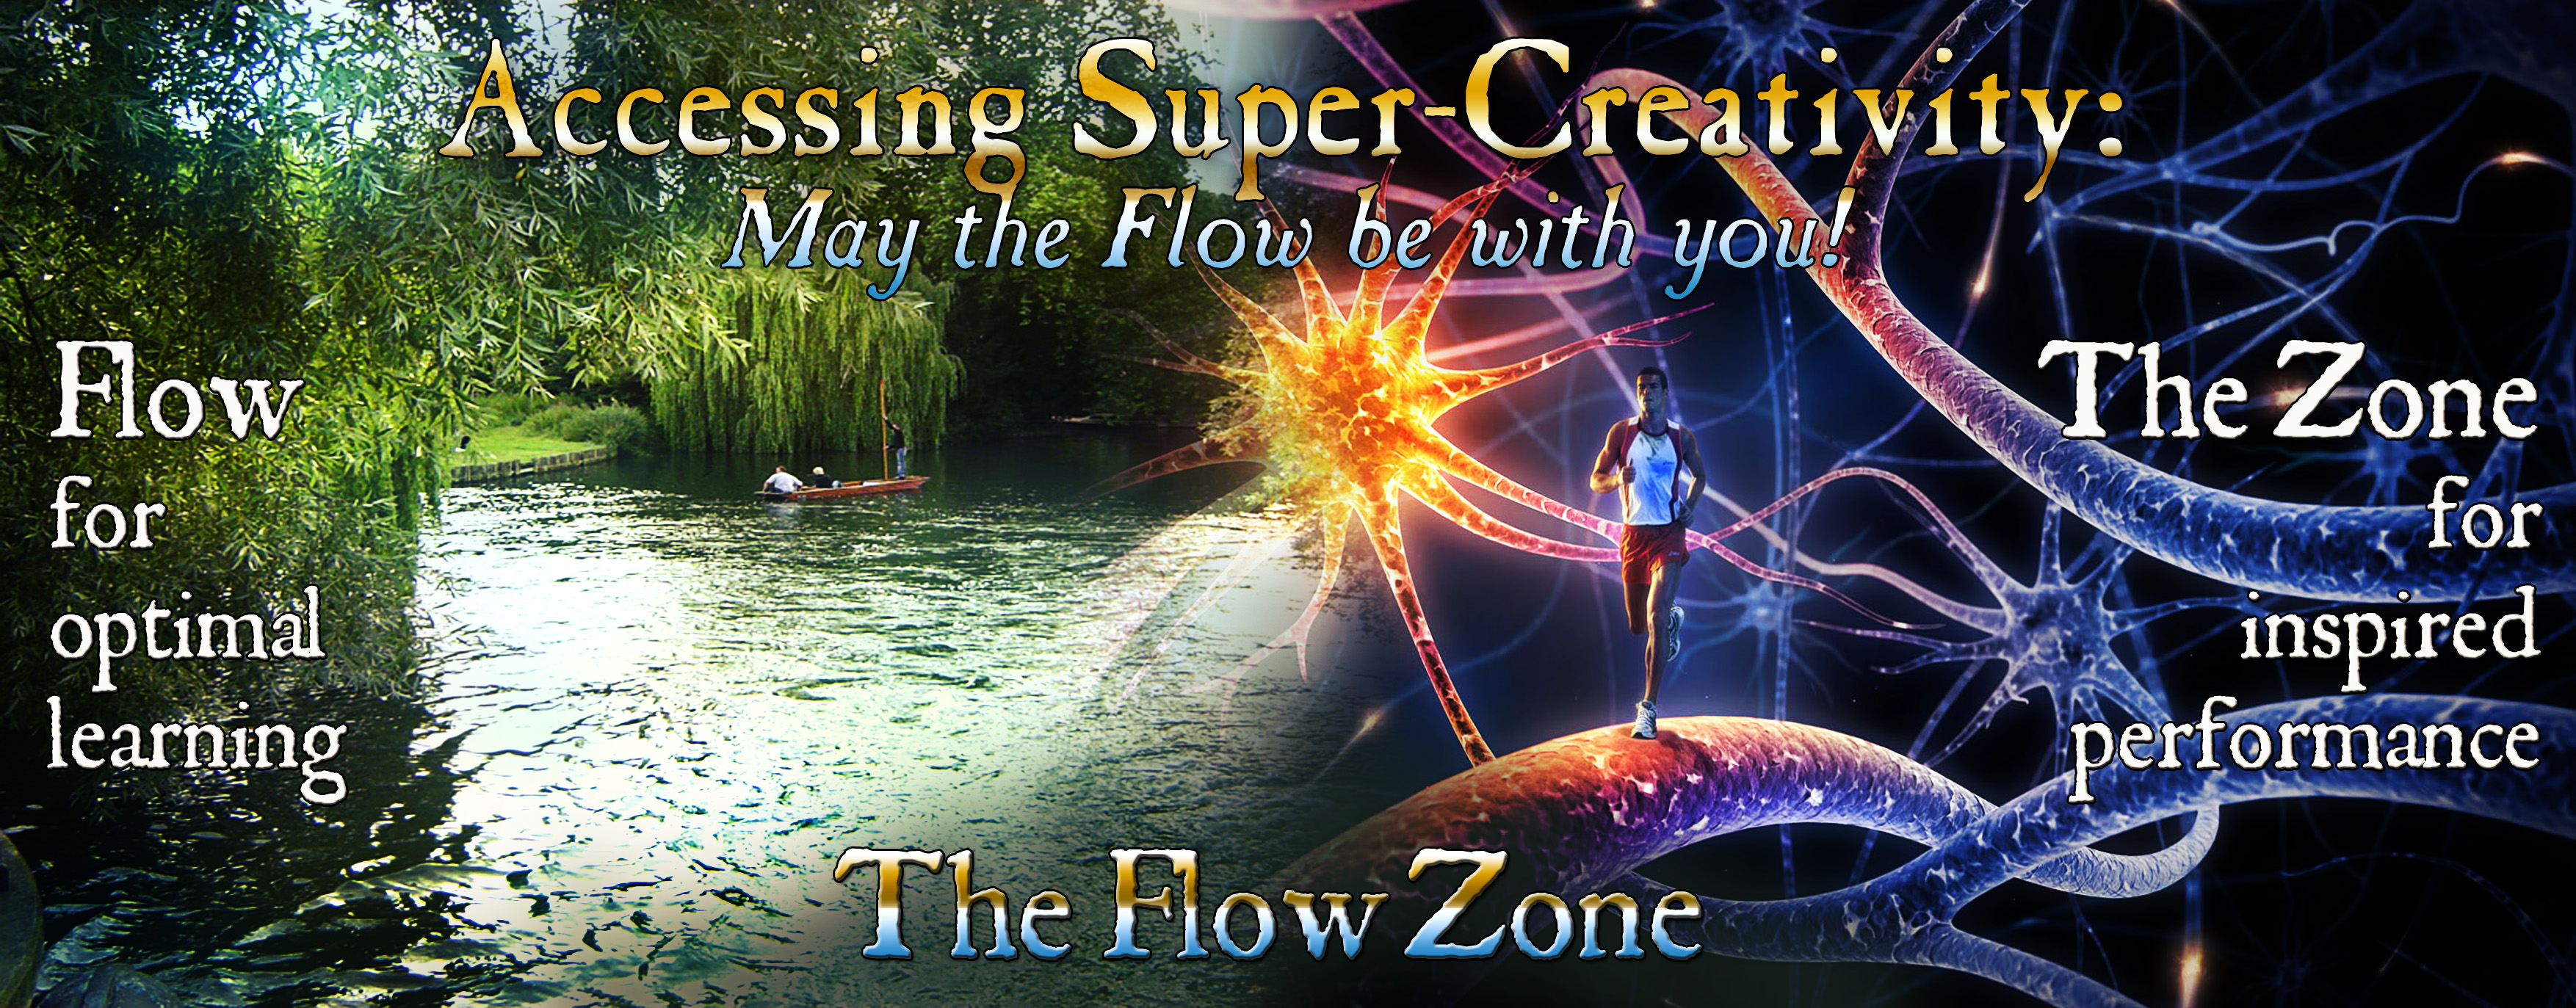 The Flow Zone mashup 2015